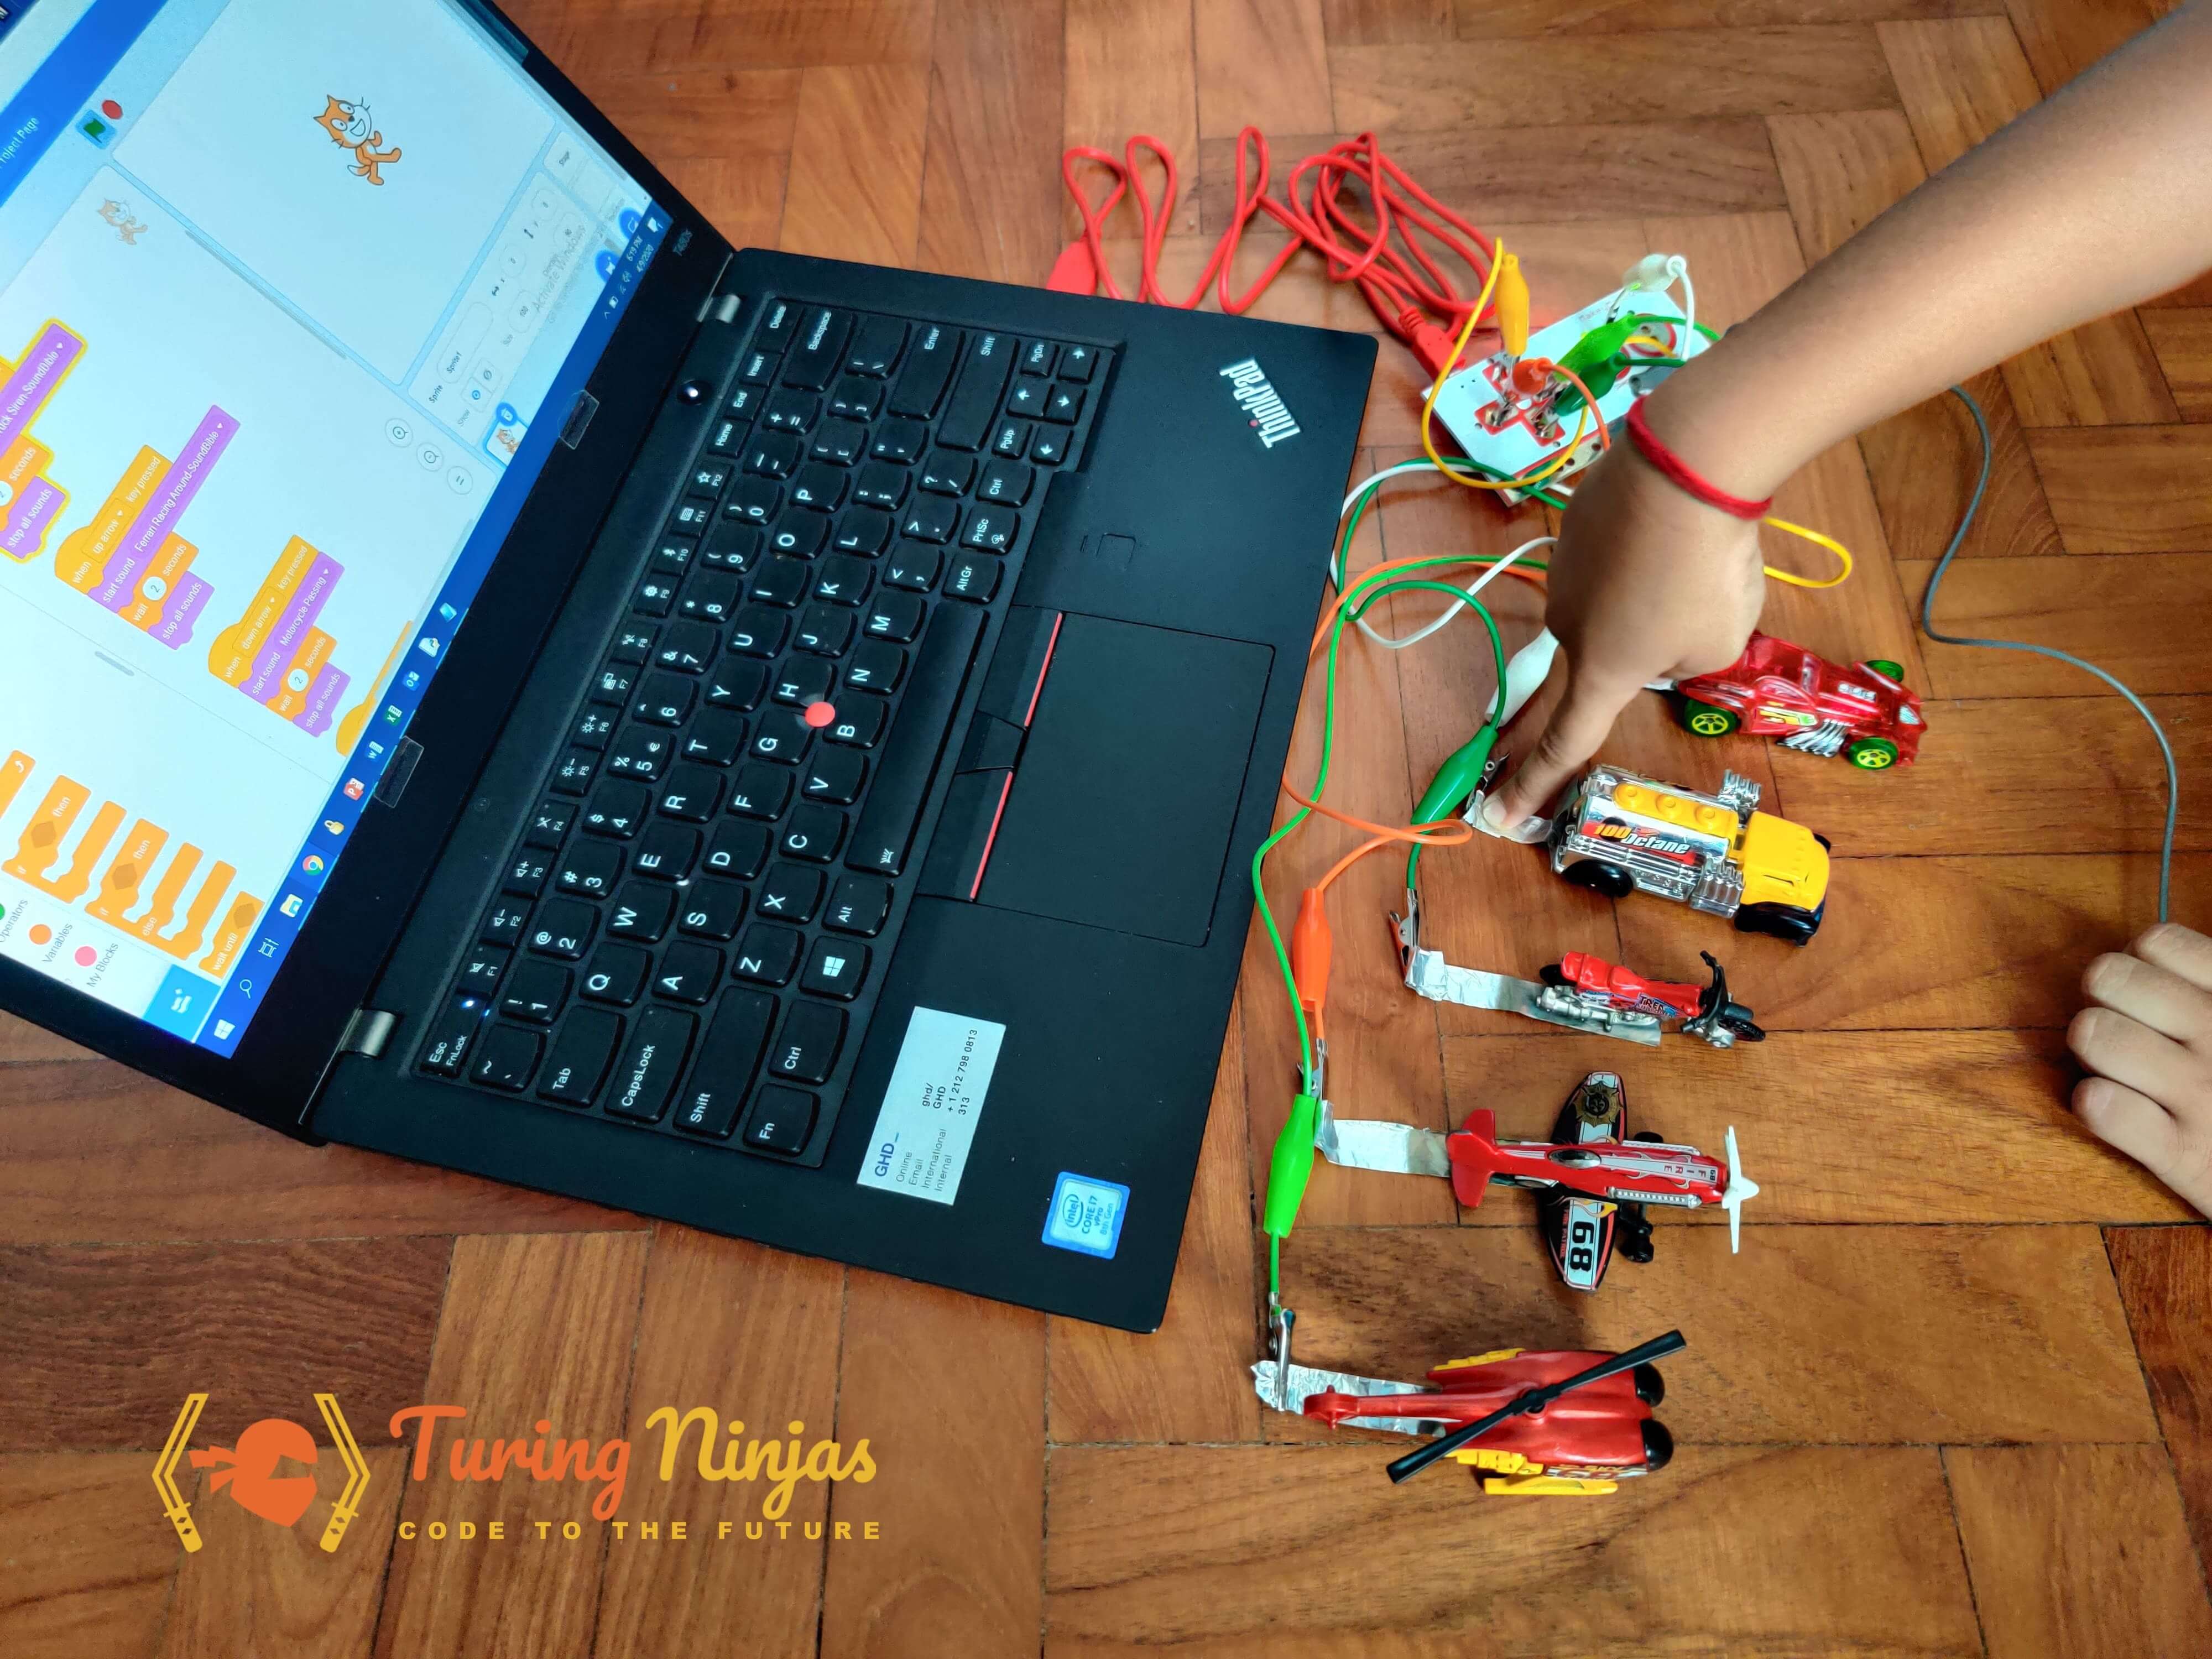 A kid adding sound effects to hotwheels using Scratch and makey makey